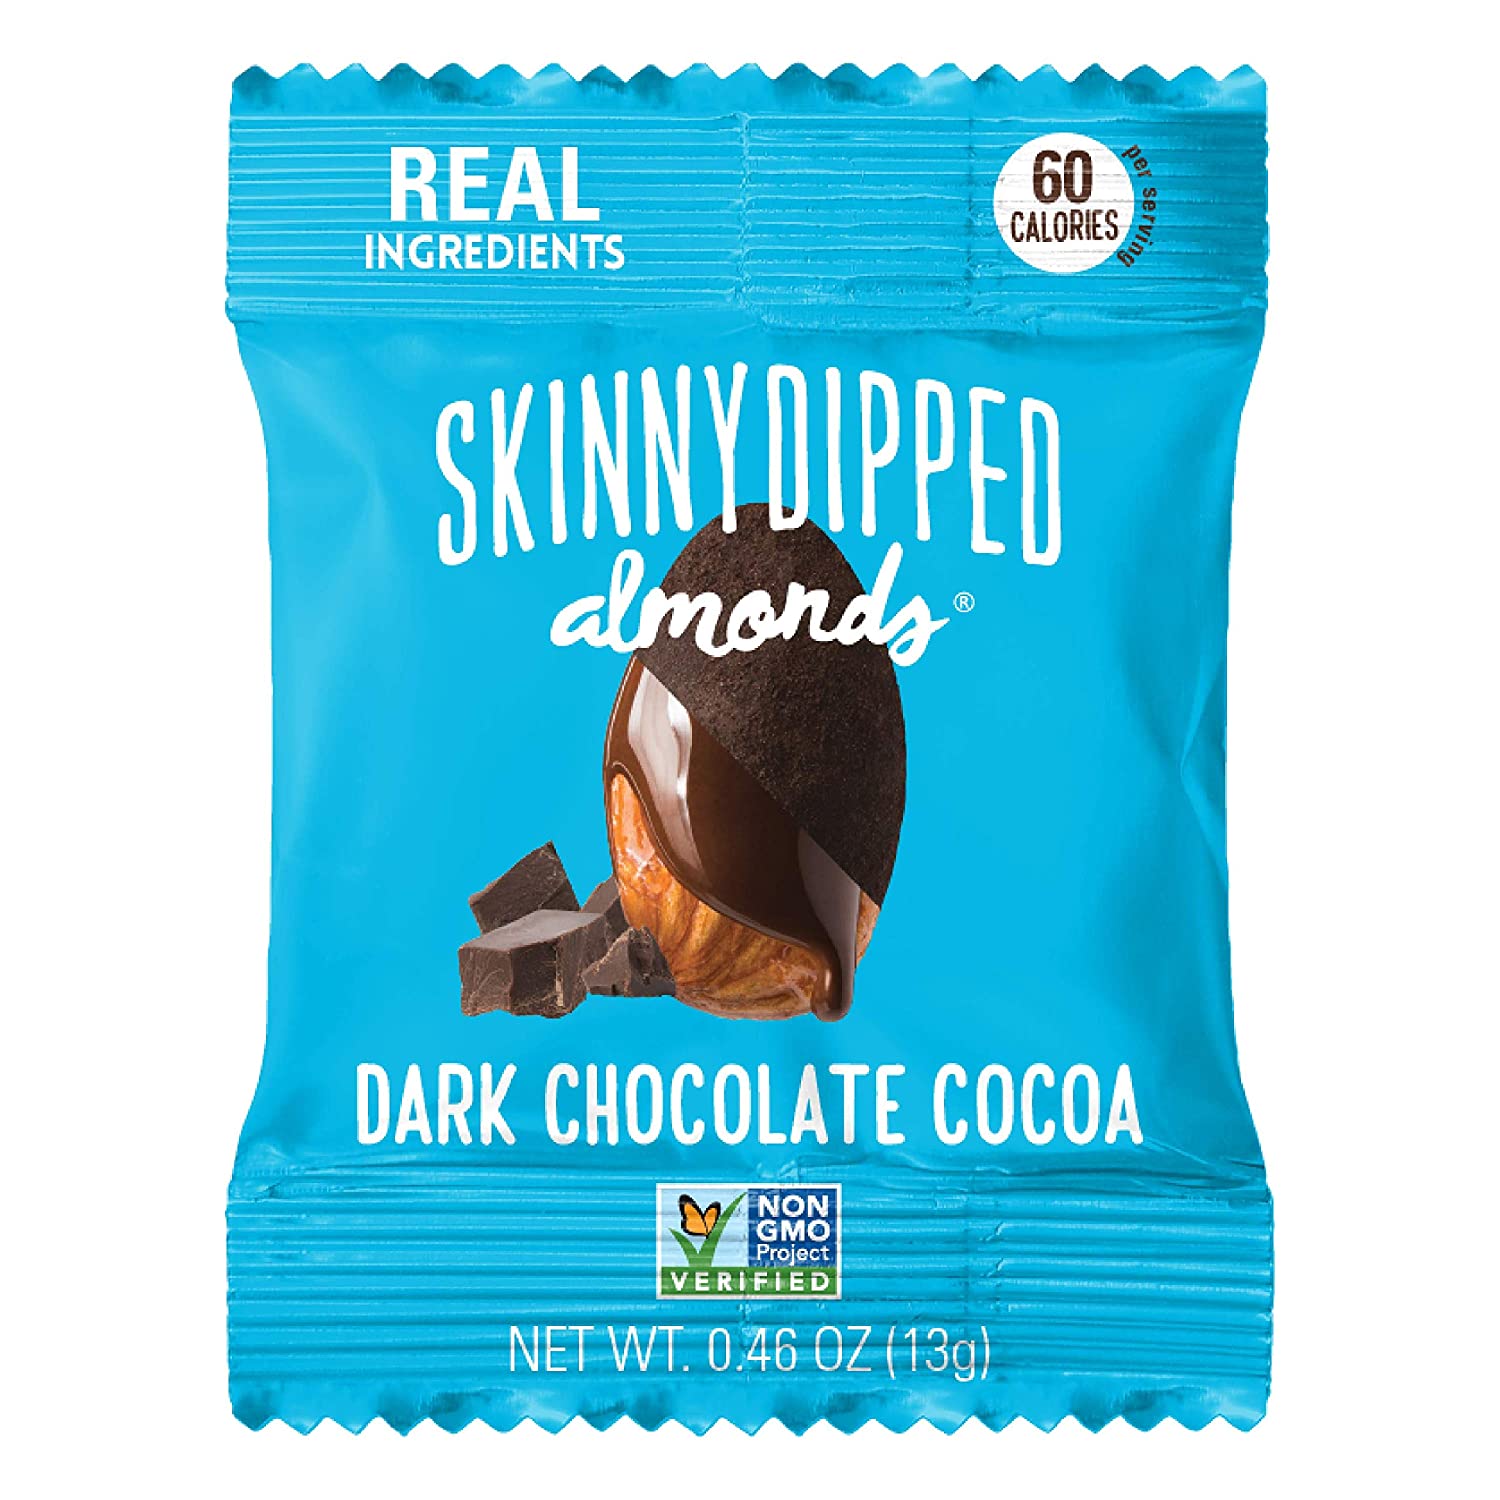 SKINNYDIPPED Dark Chocolate Cocoa Covered Almonds, Pack of 24